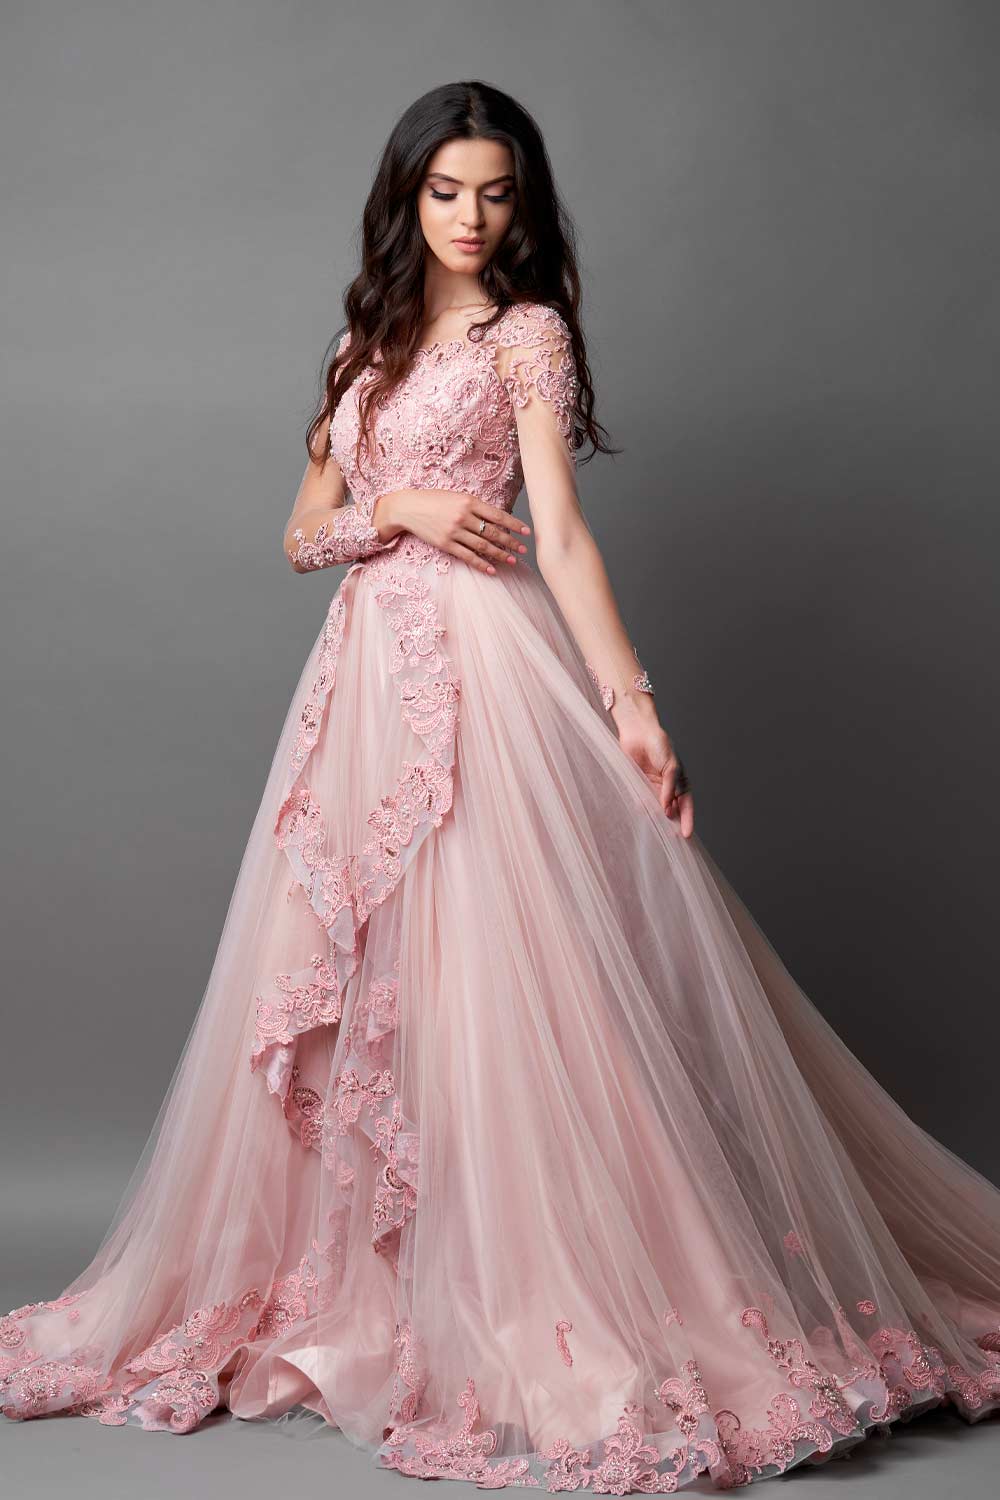 Long-Sleeved Pink Wedding Gowns